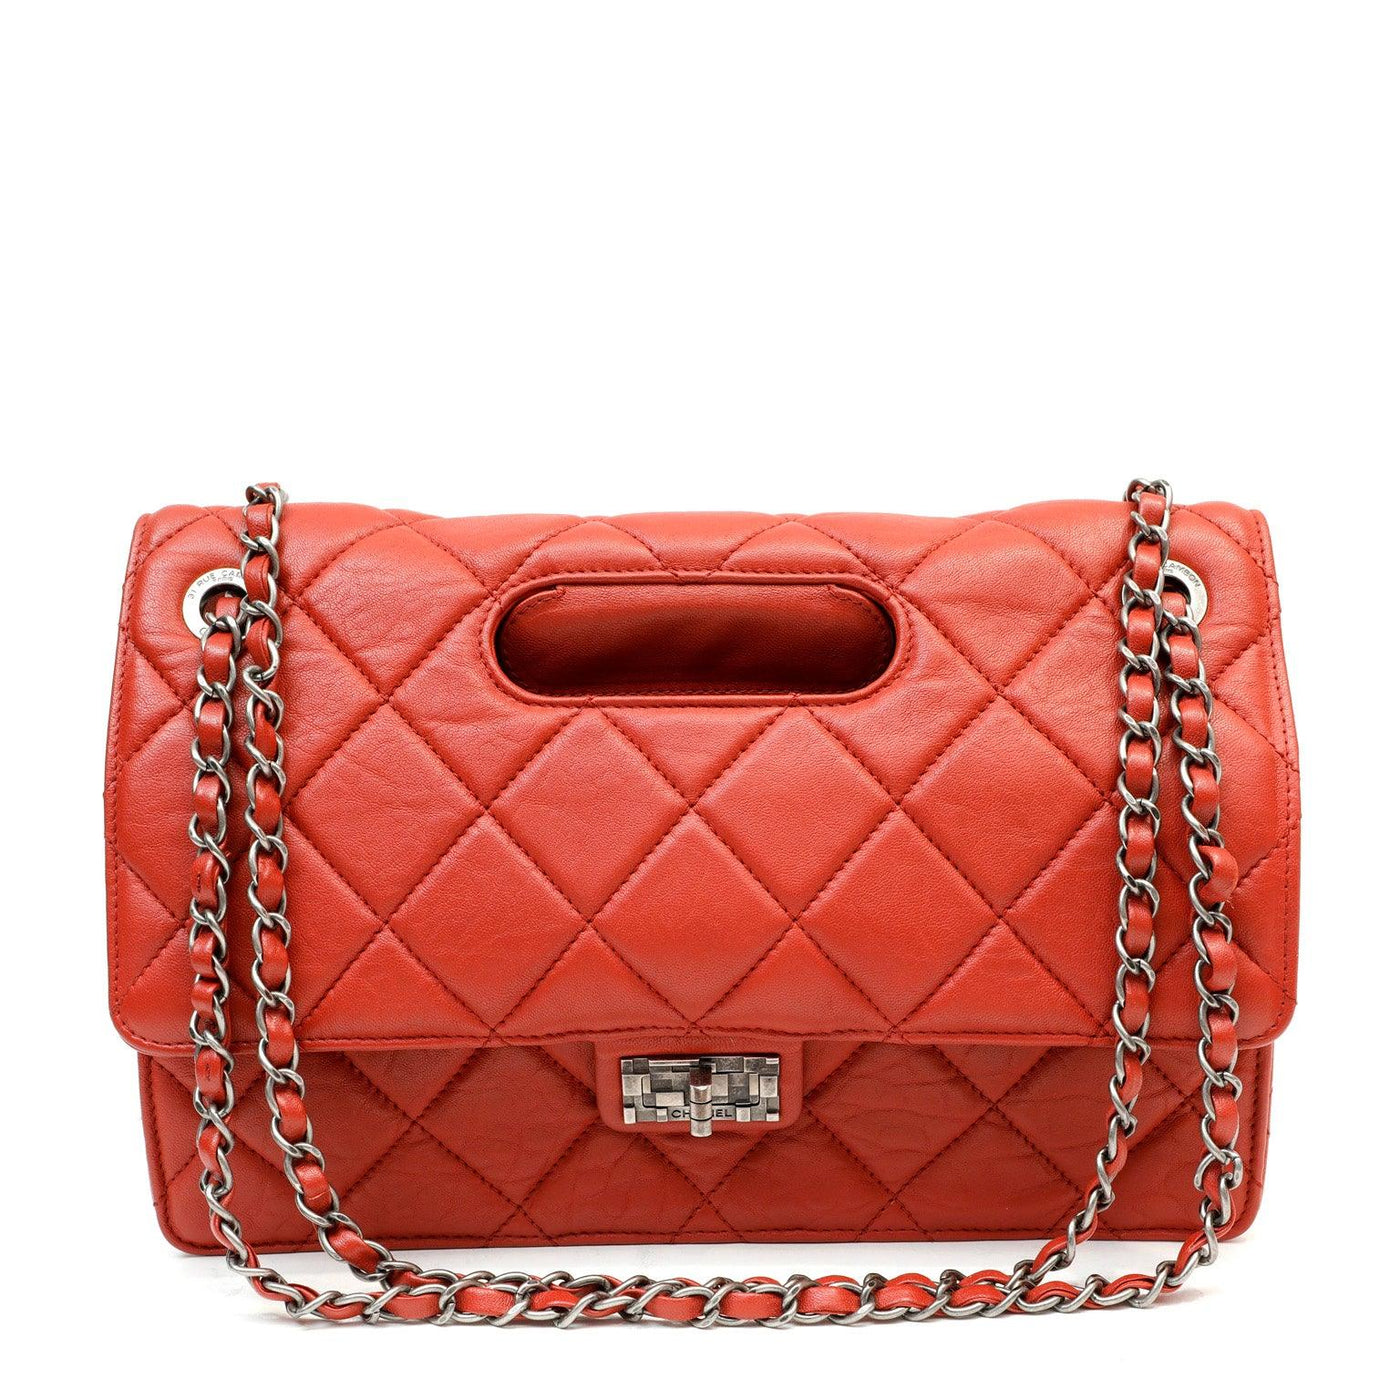 Chanel Red Lambskin Paris Byzance Takeaway Flap Bag - Only Authentics